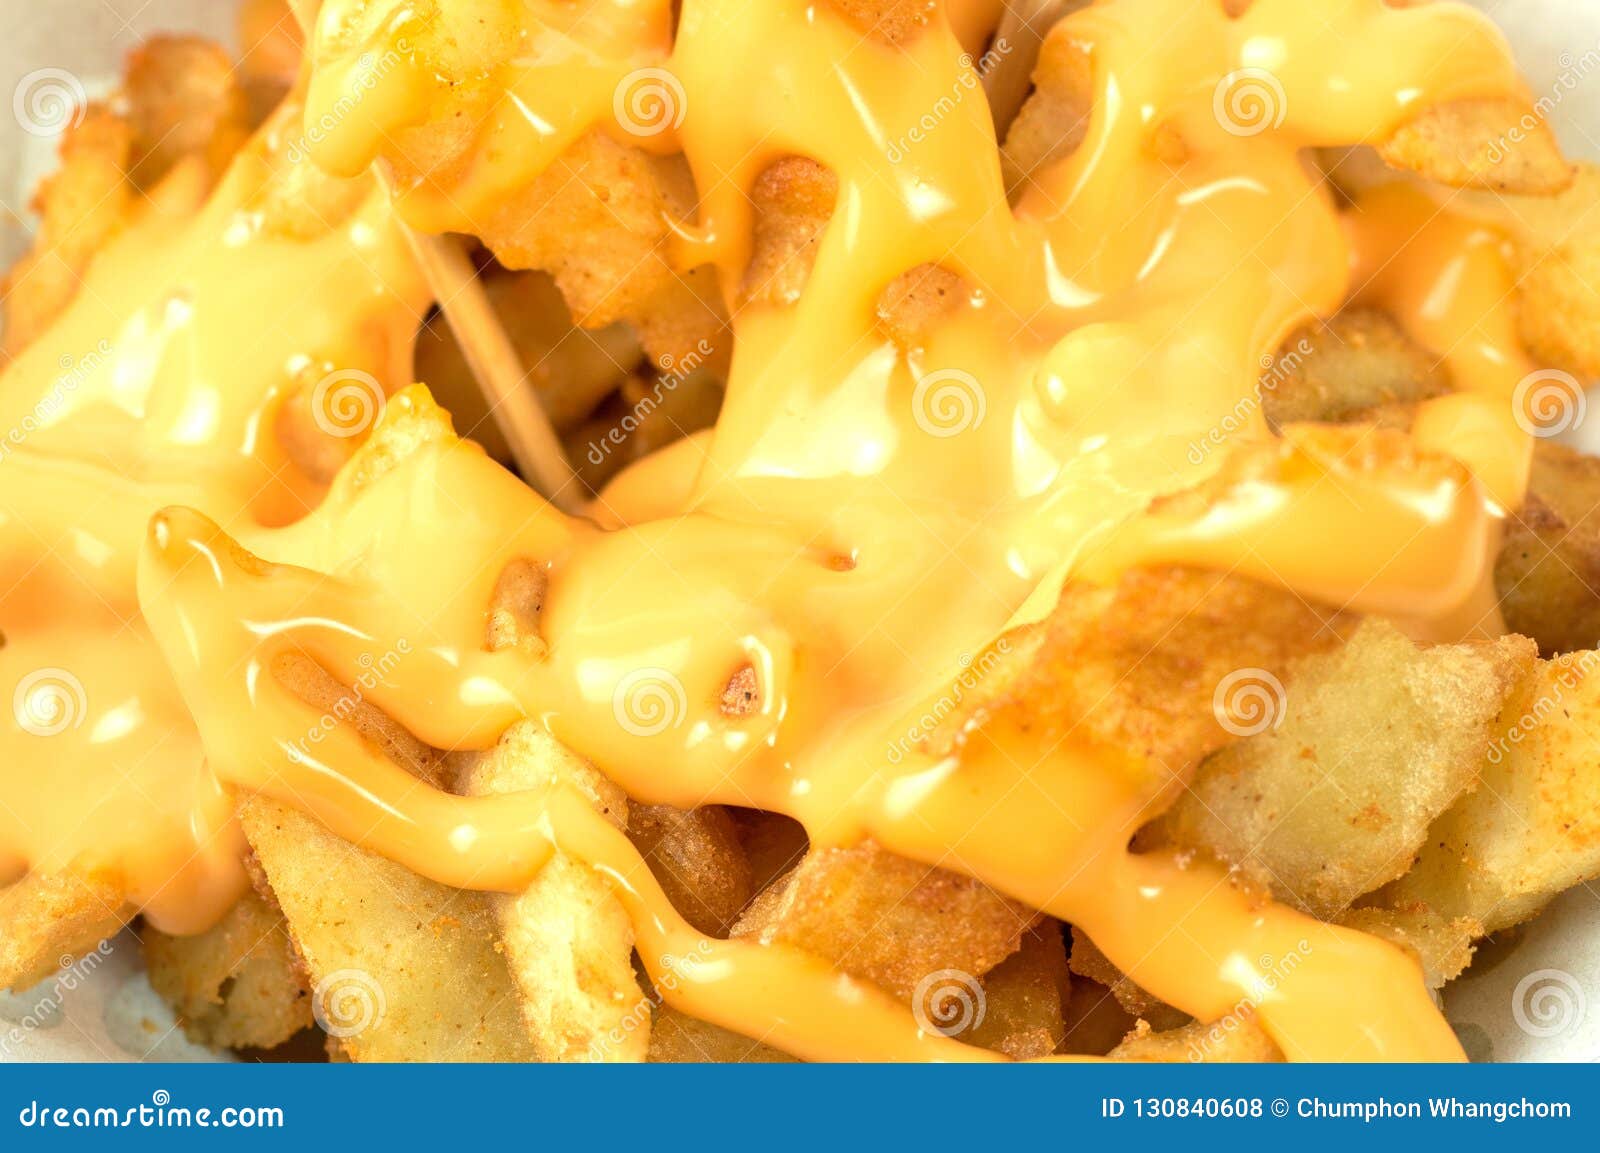 POTATO FRIES WITH CHEESE